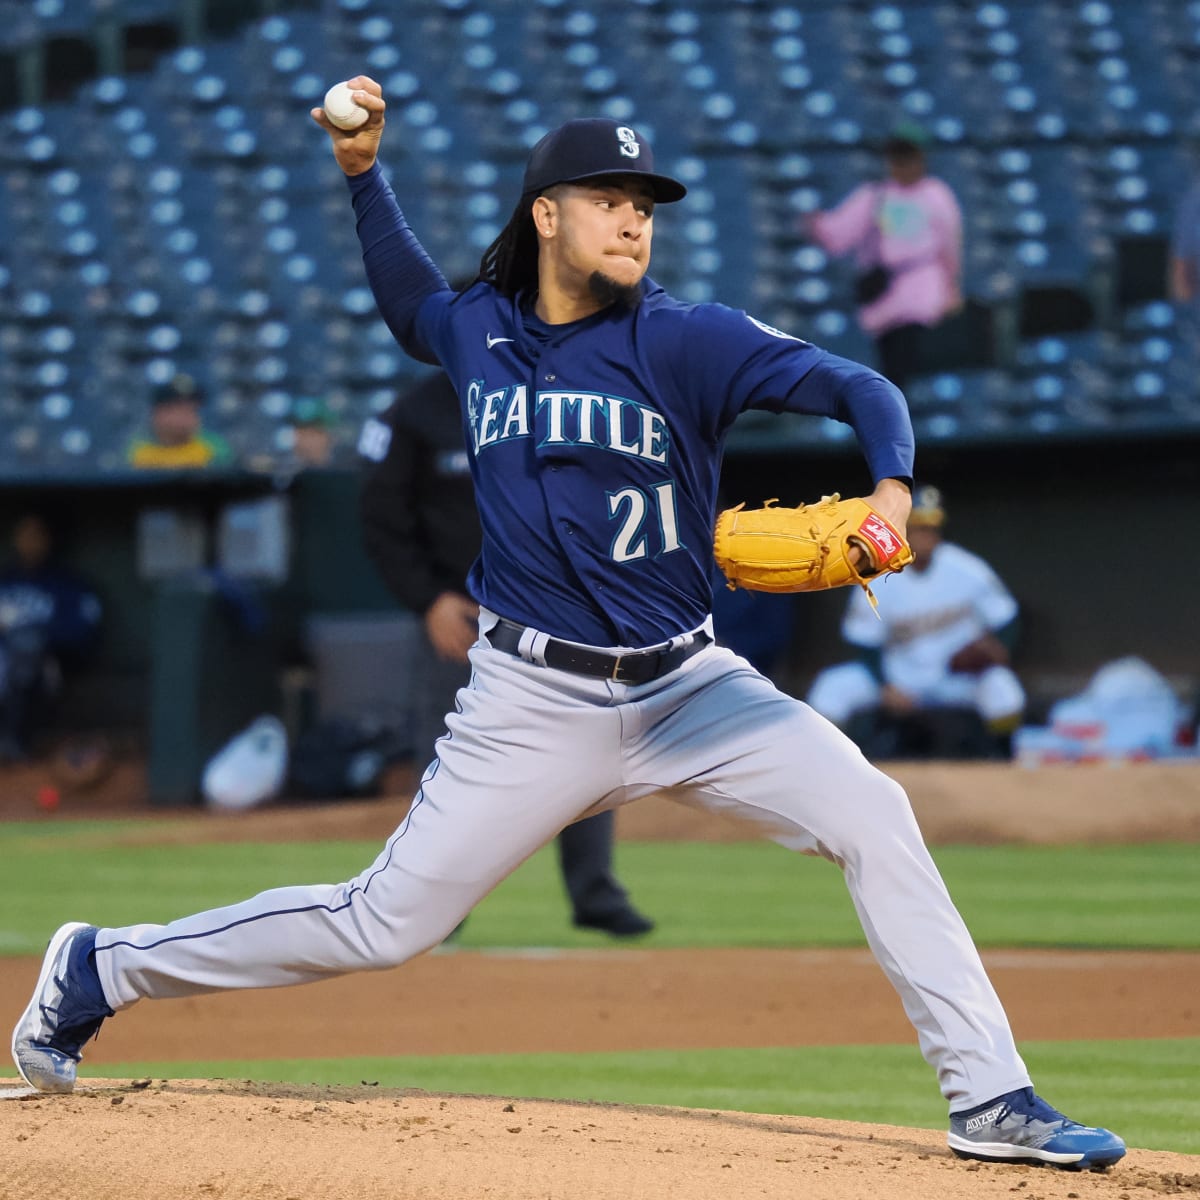 Luis Castillo agrees to huge contract extension with Mariners